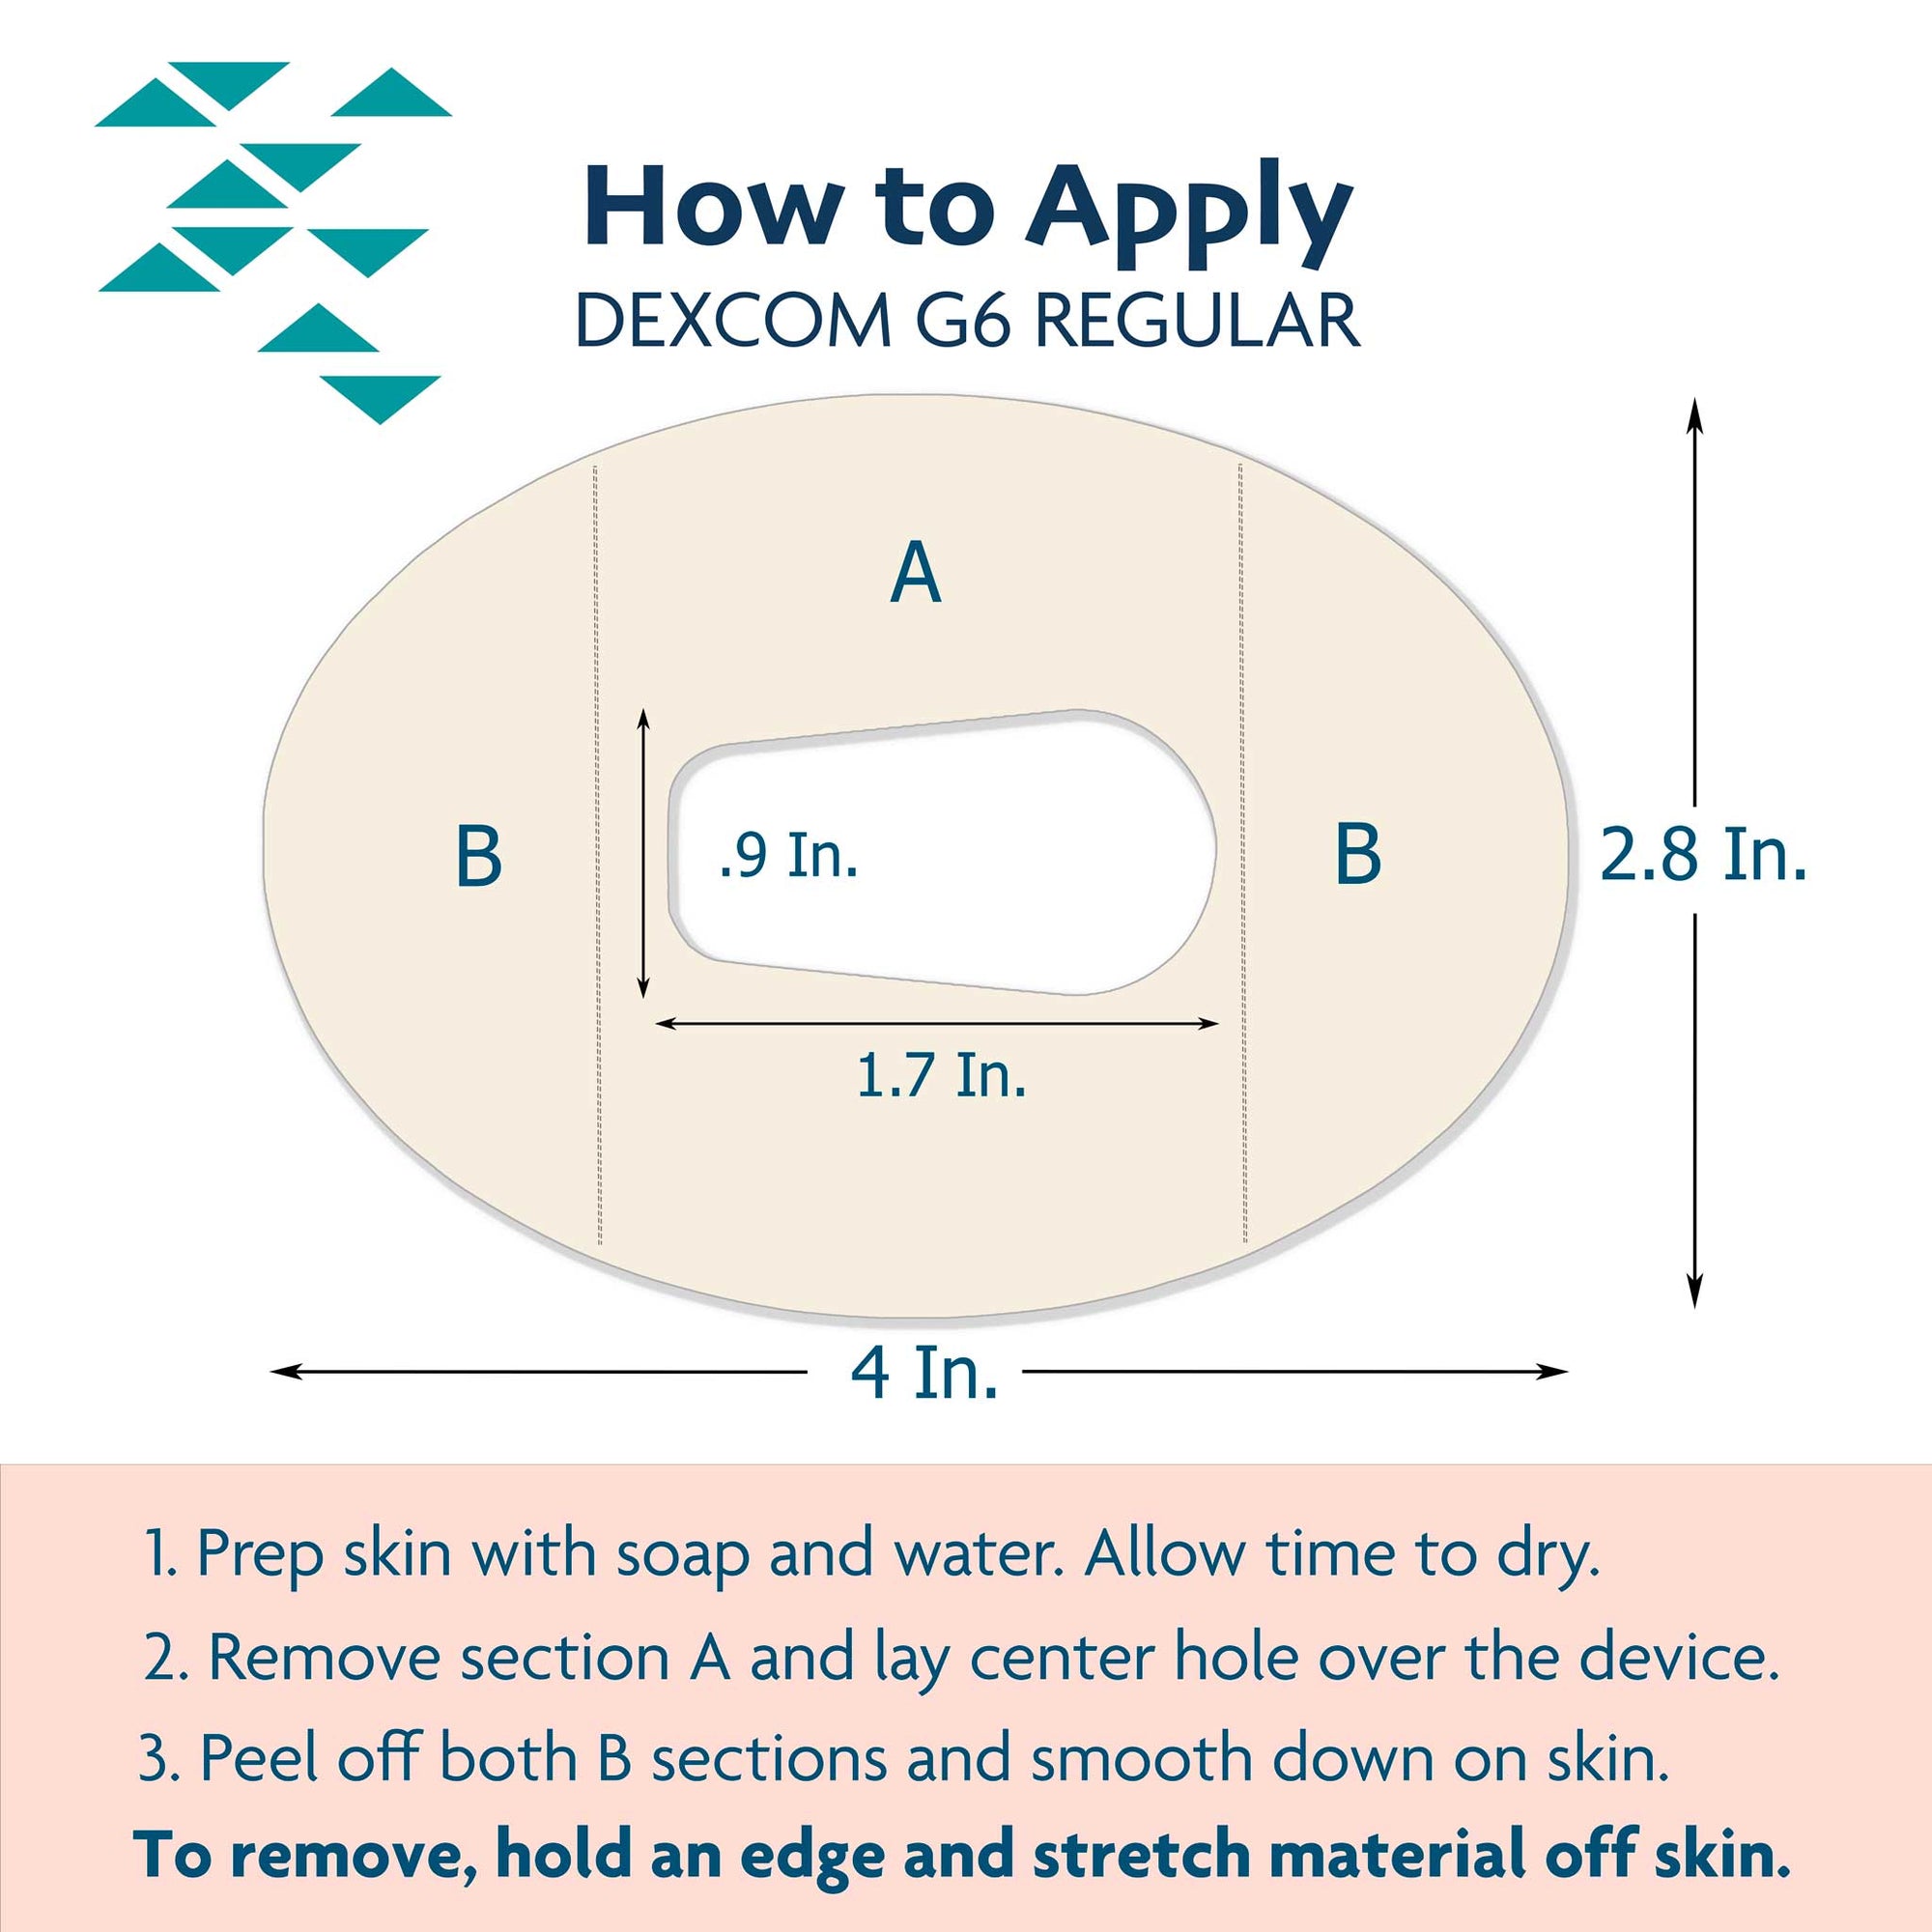 Dexcom G6 Adhesive Tape Application Instructions and Dimensions